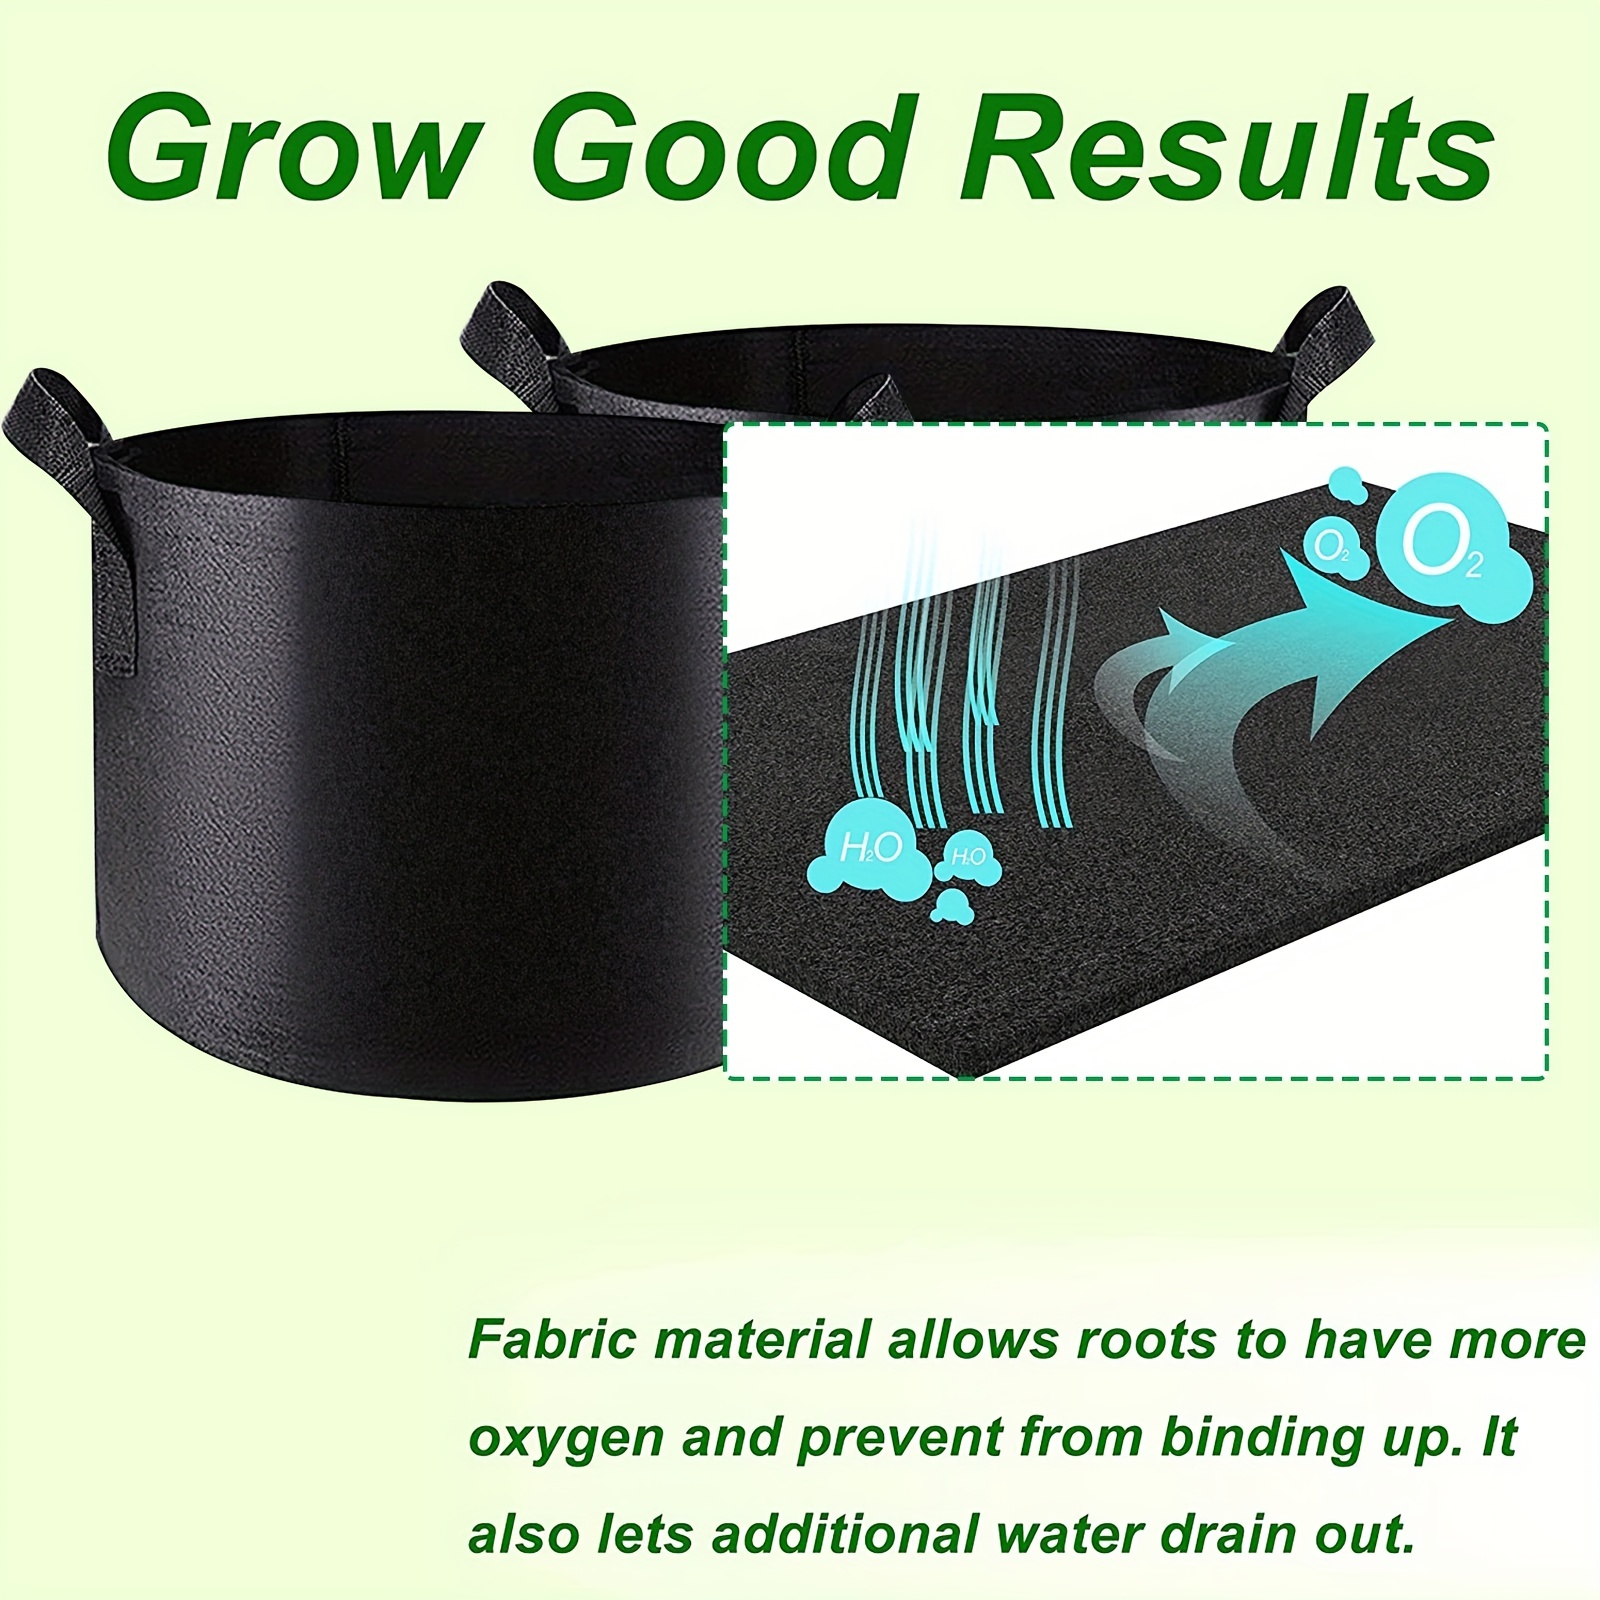 T4U Fabric Plant Grow Bags with Handle 7 Gallon Pack of 5, Heavy